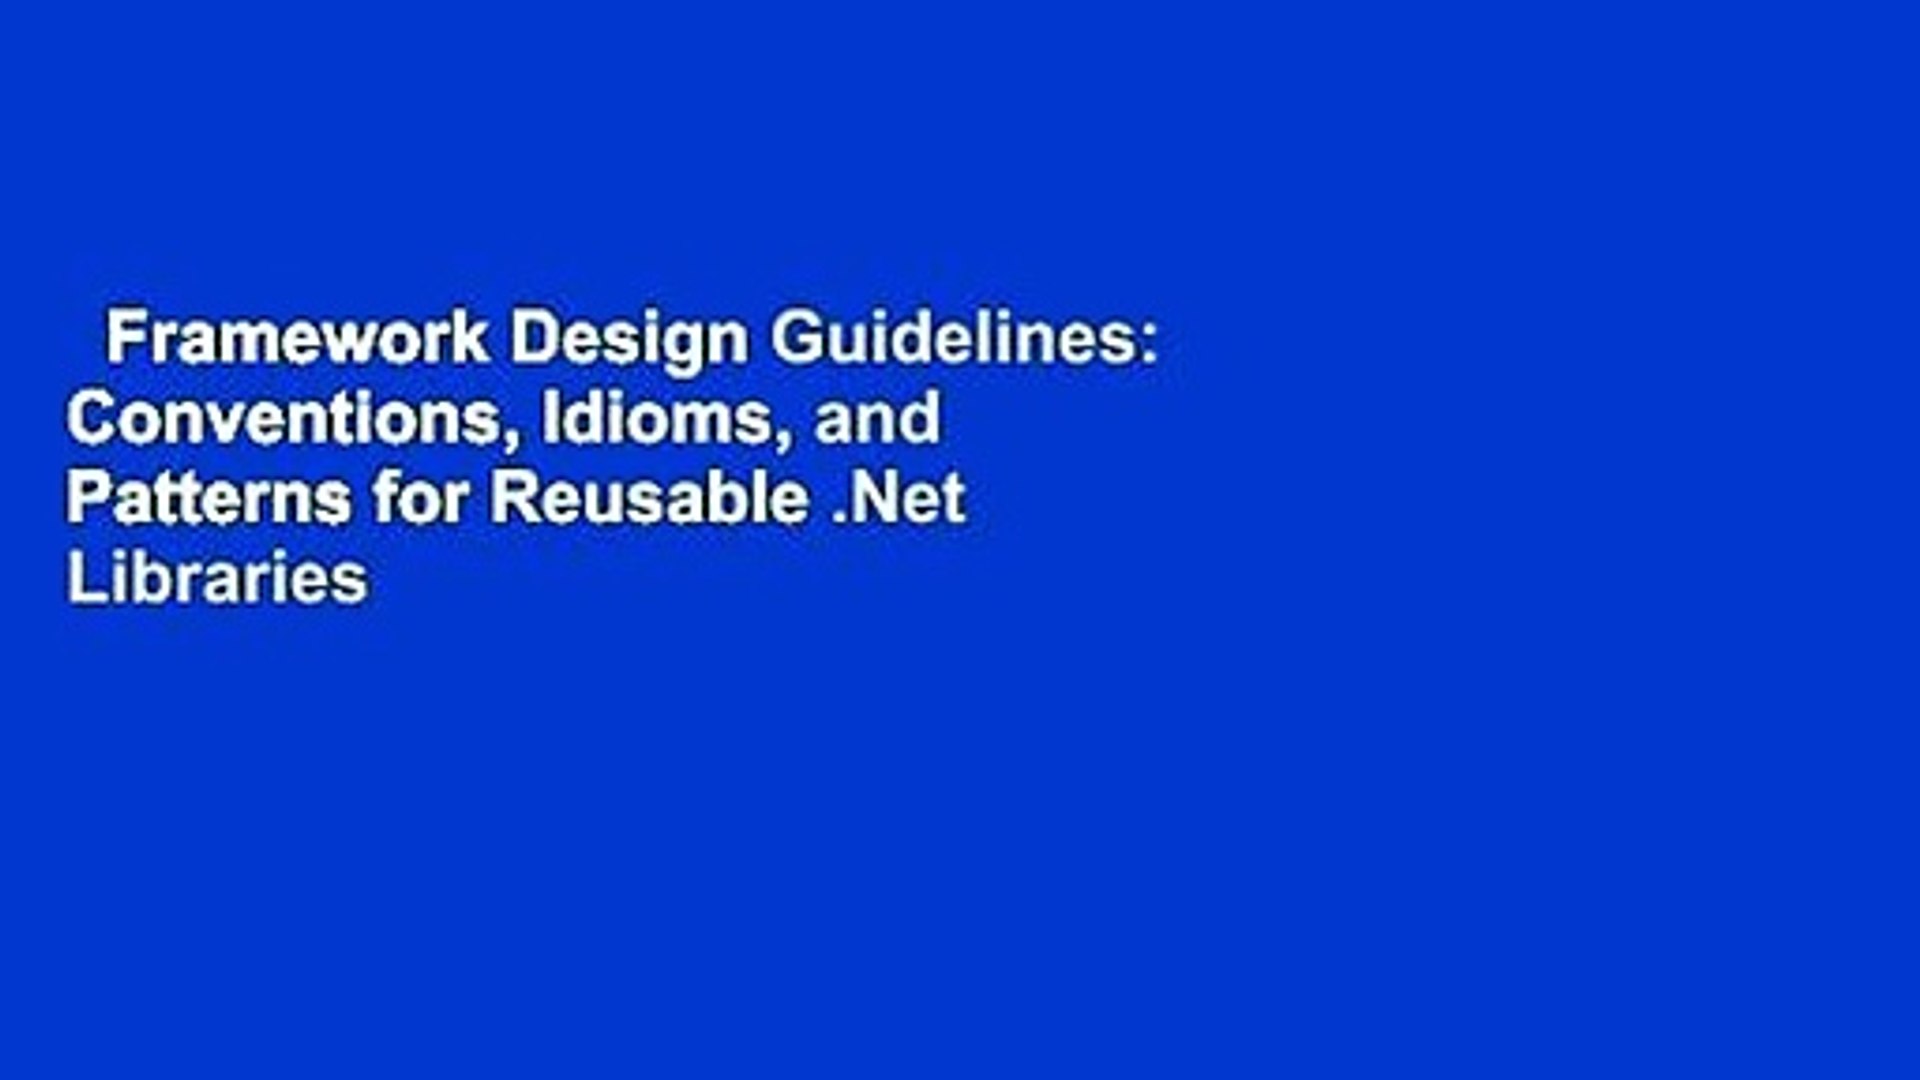 Framework Design Guidelines: Conventions, Idioms, and Patterns for Reusable .Net Libraries